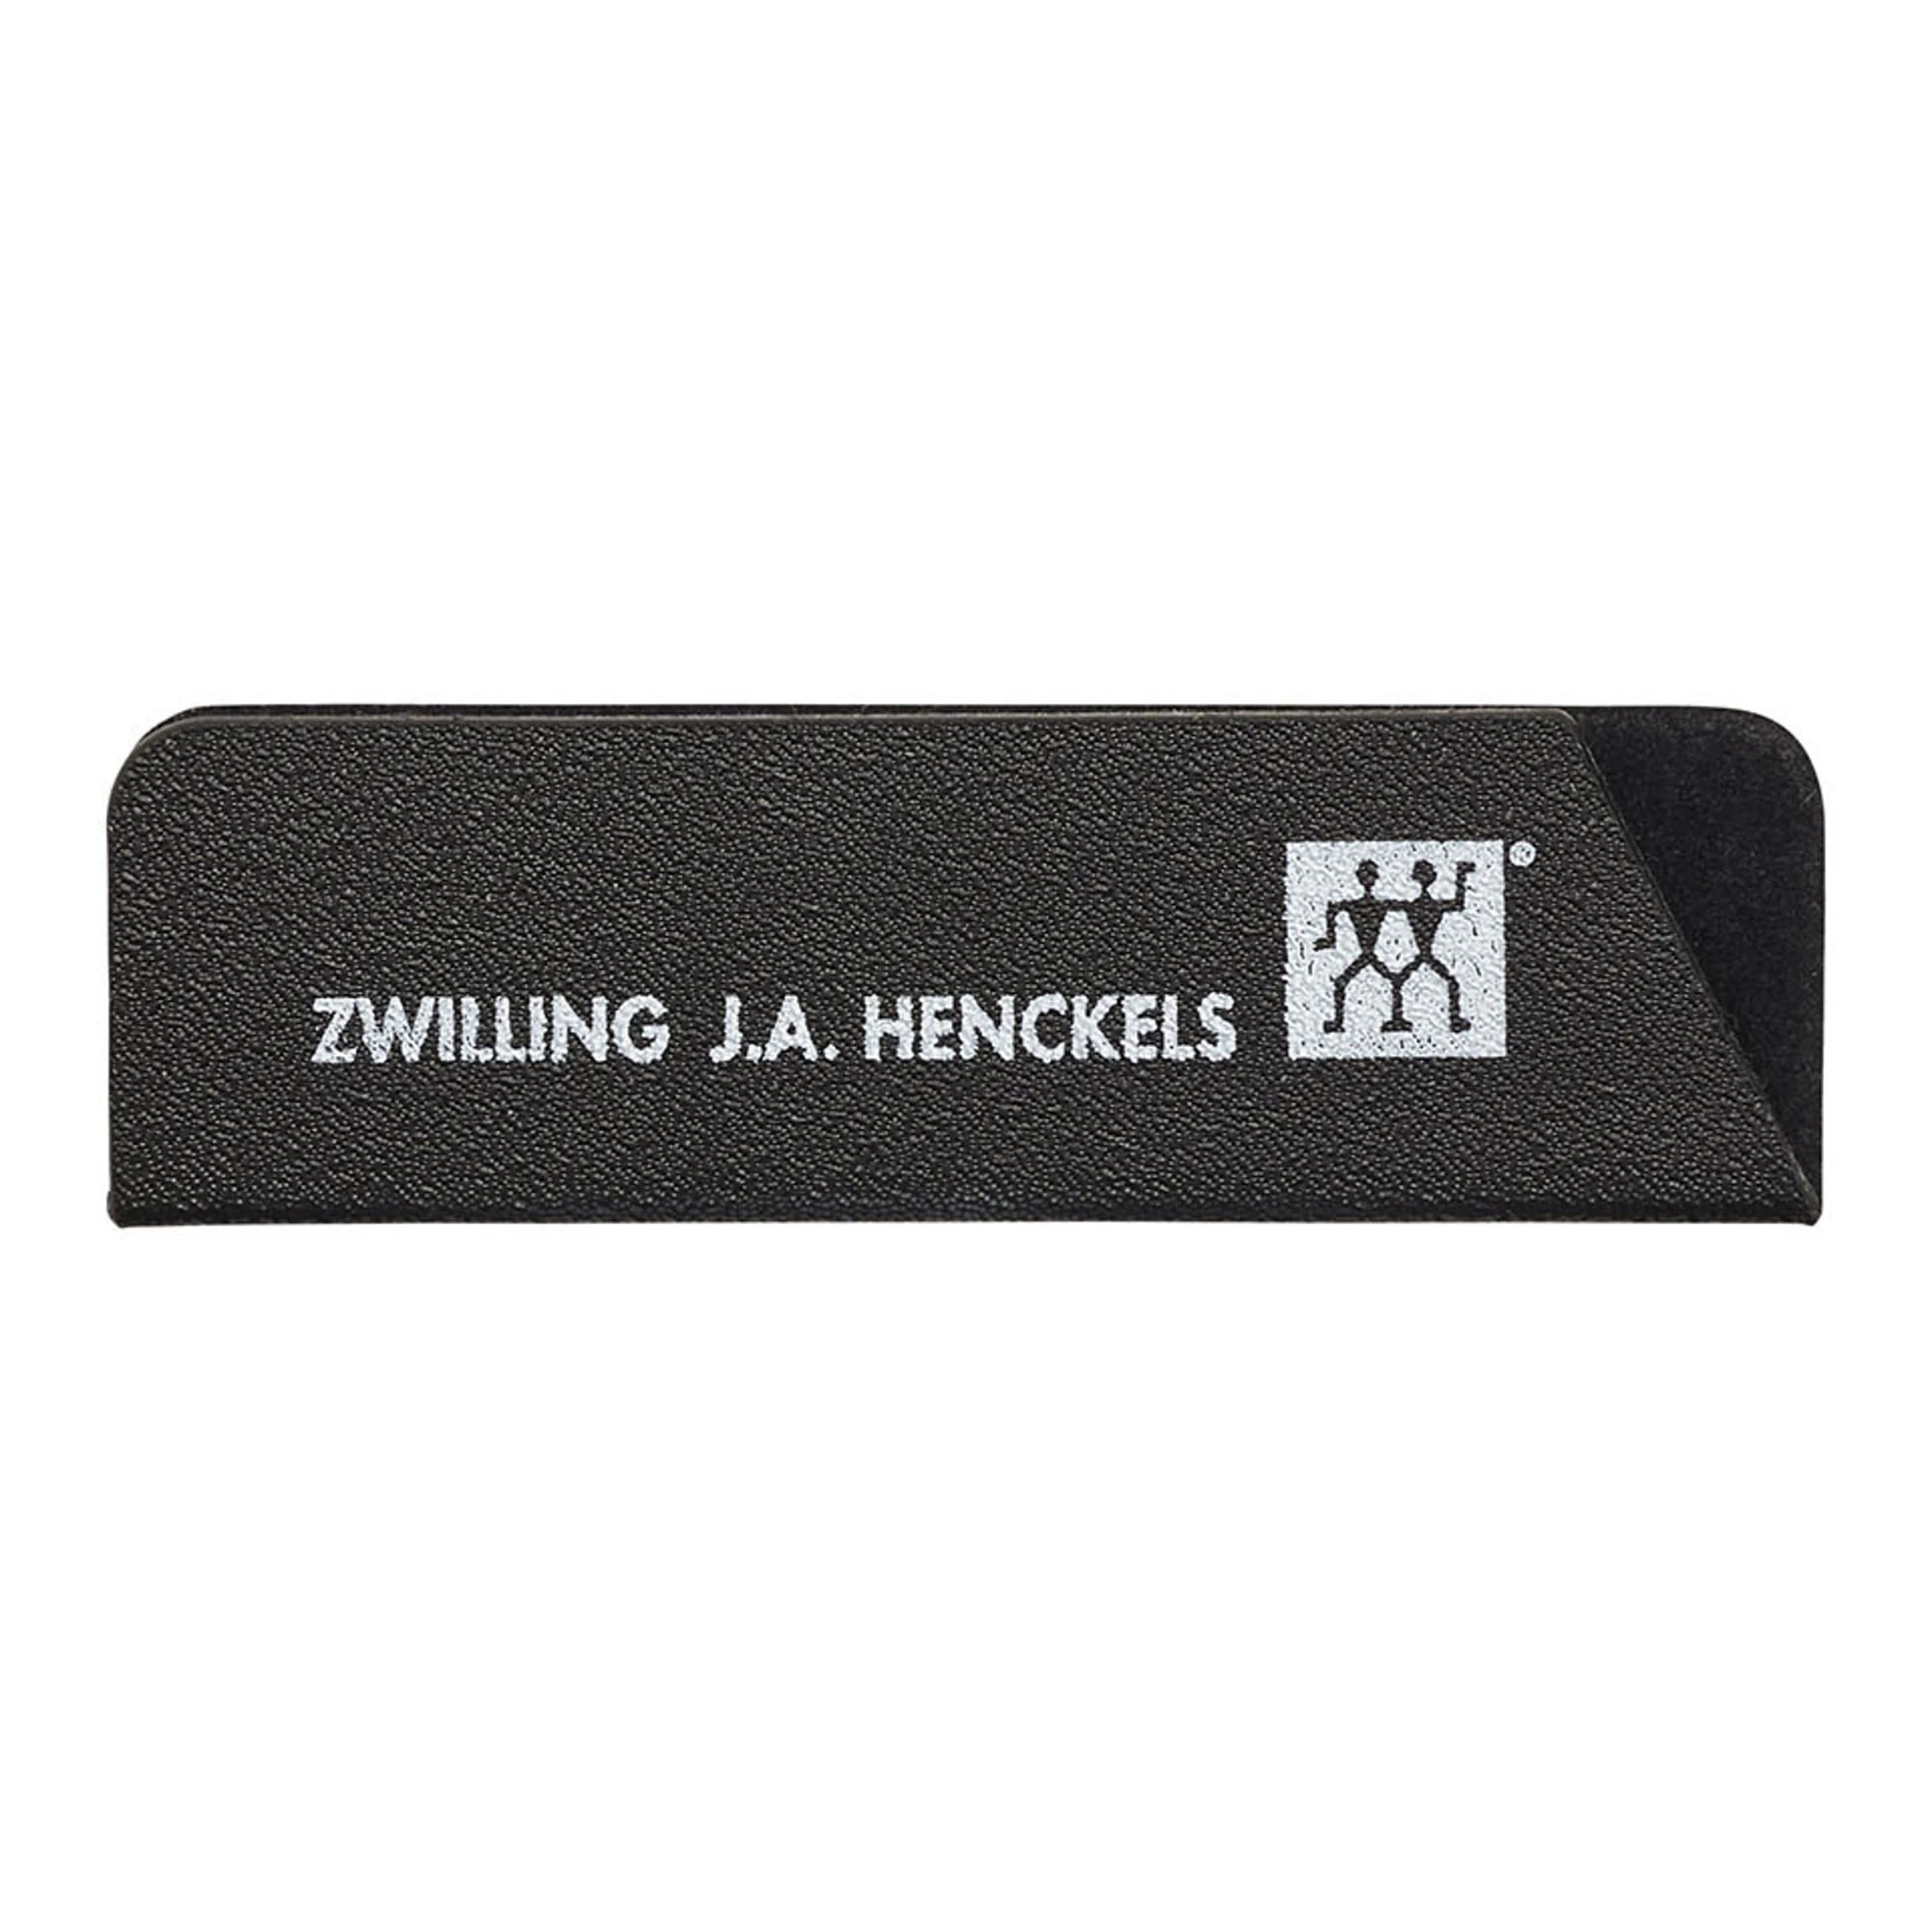 https://www.homethreads.com/files/zwilling/30499-520-zwilling-knife-sheath-for-up-to-3-inch-knives.webp